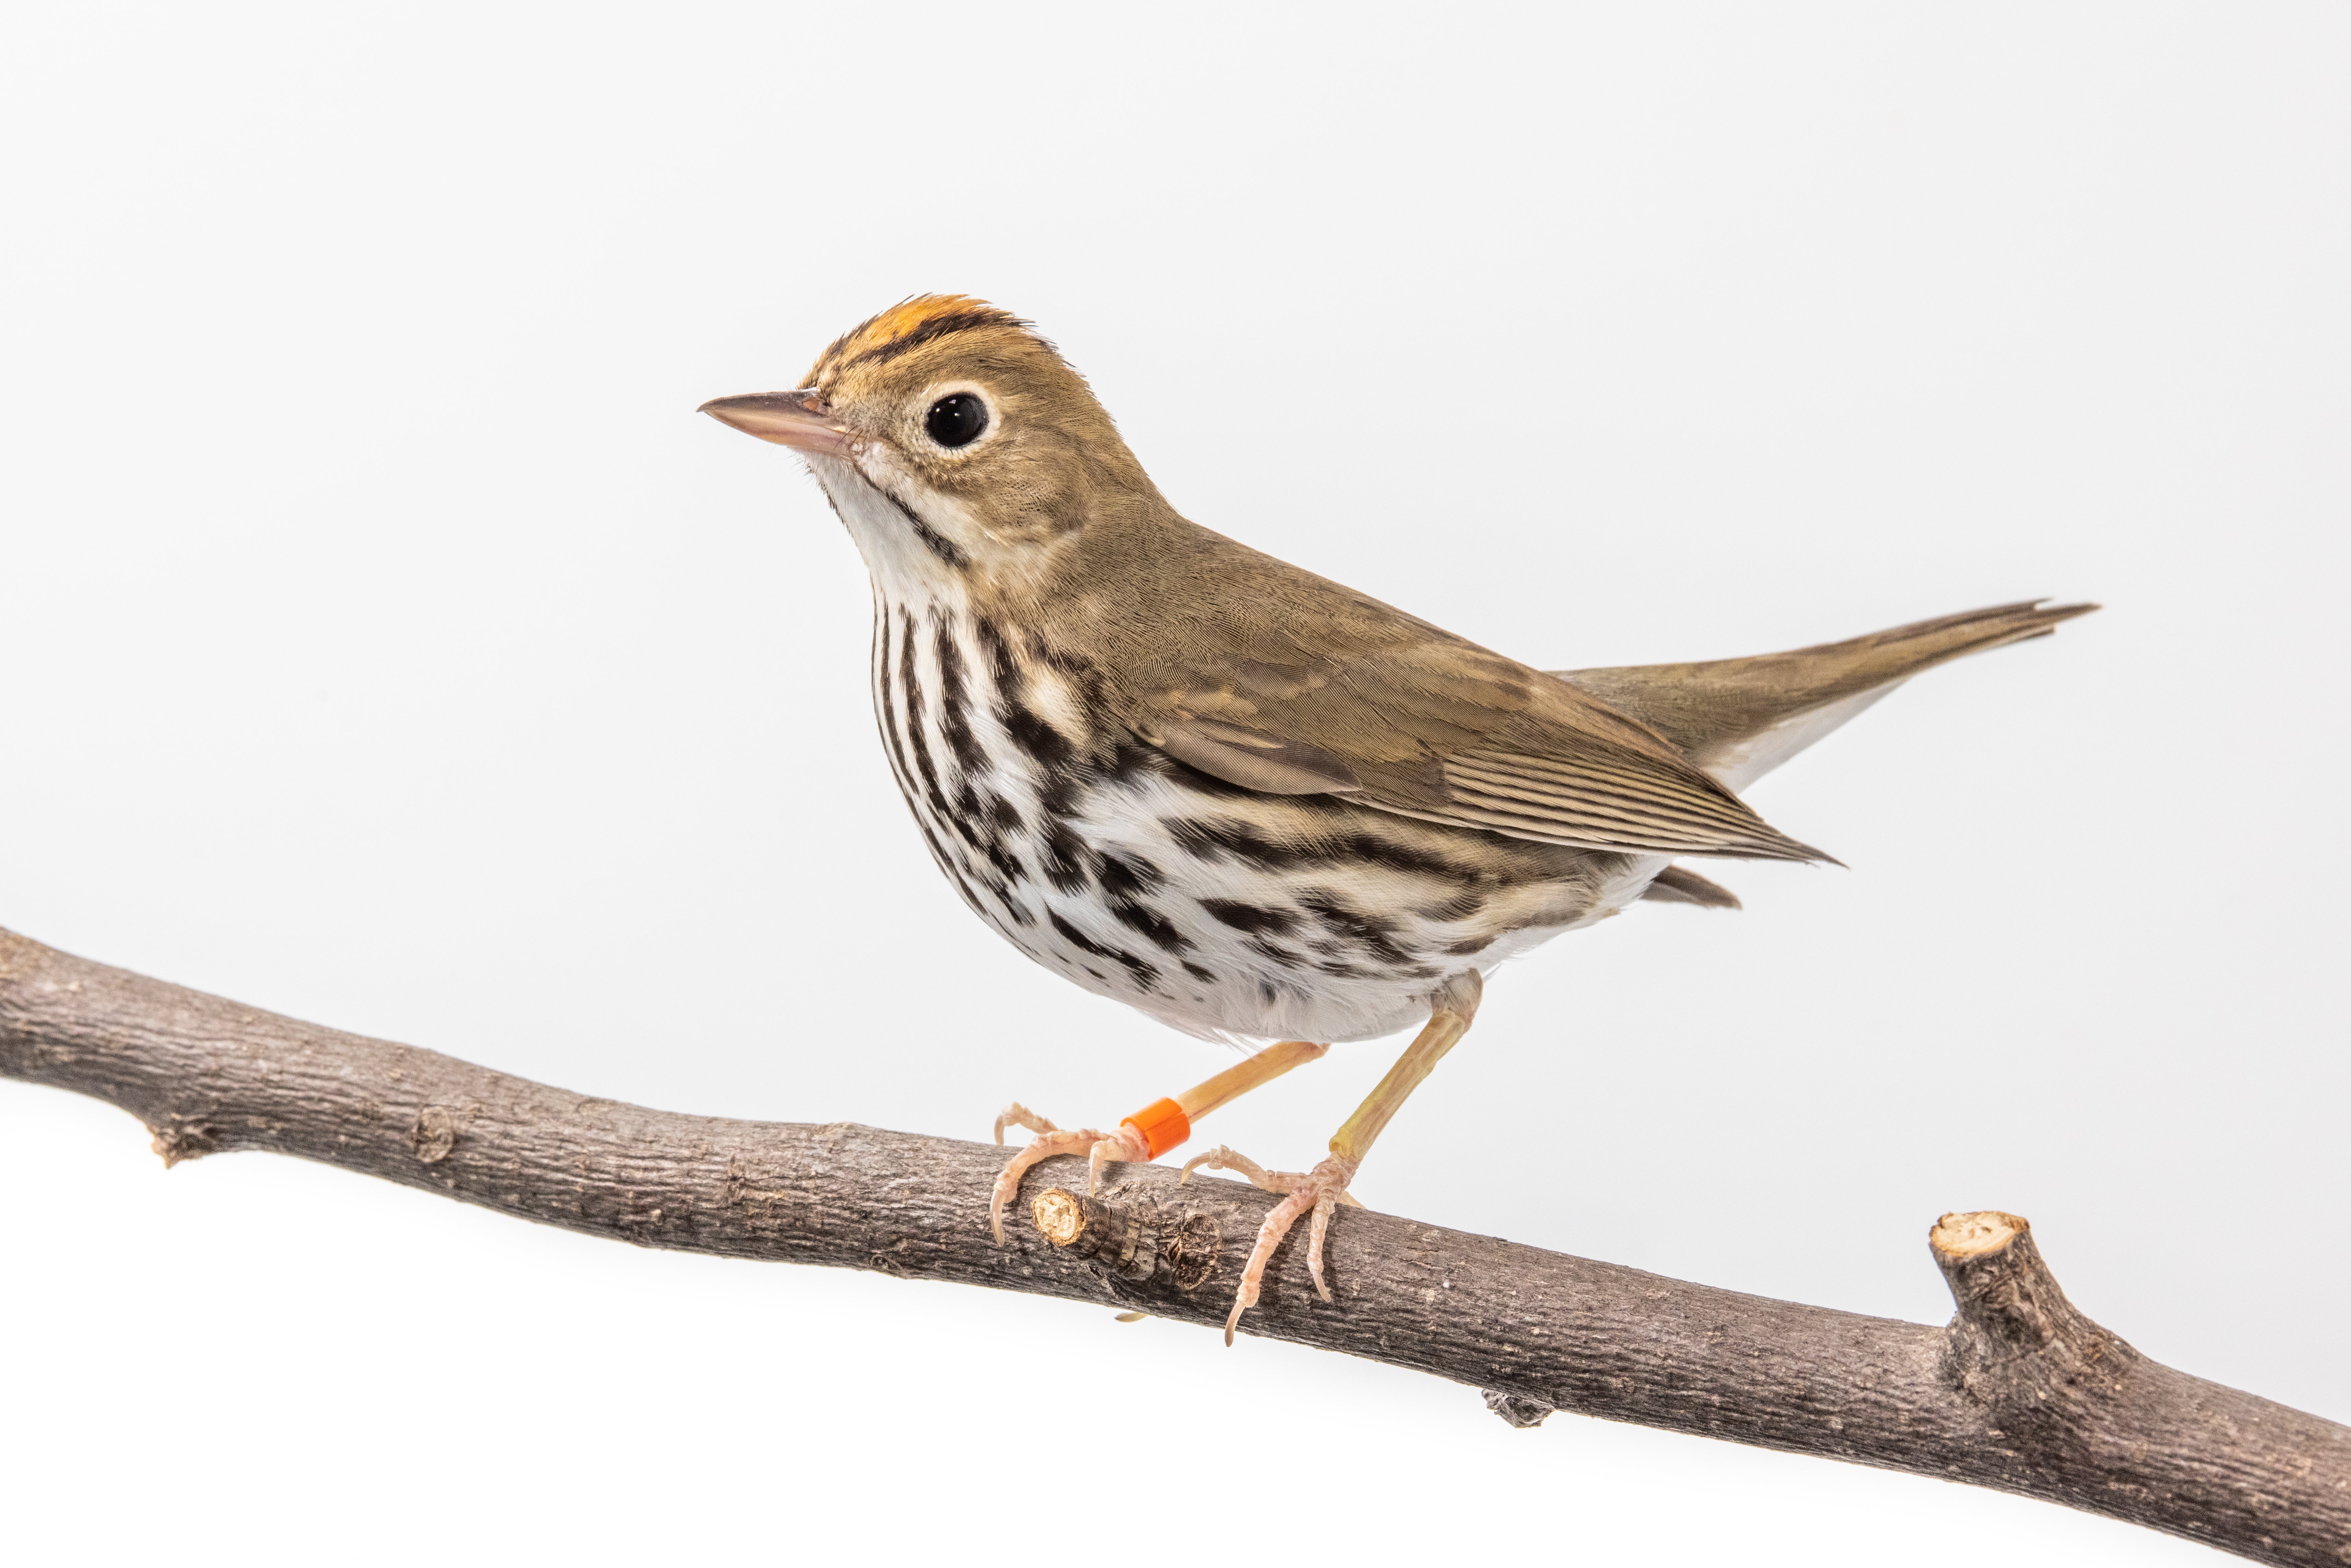 An ovenbird rests on a branch.